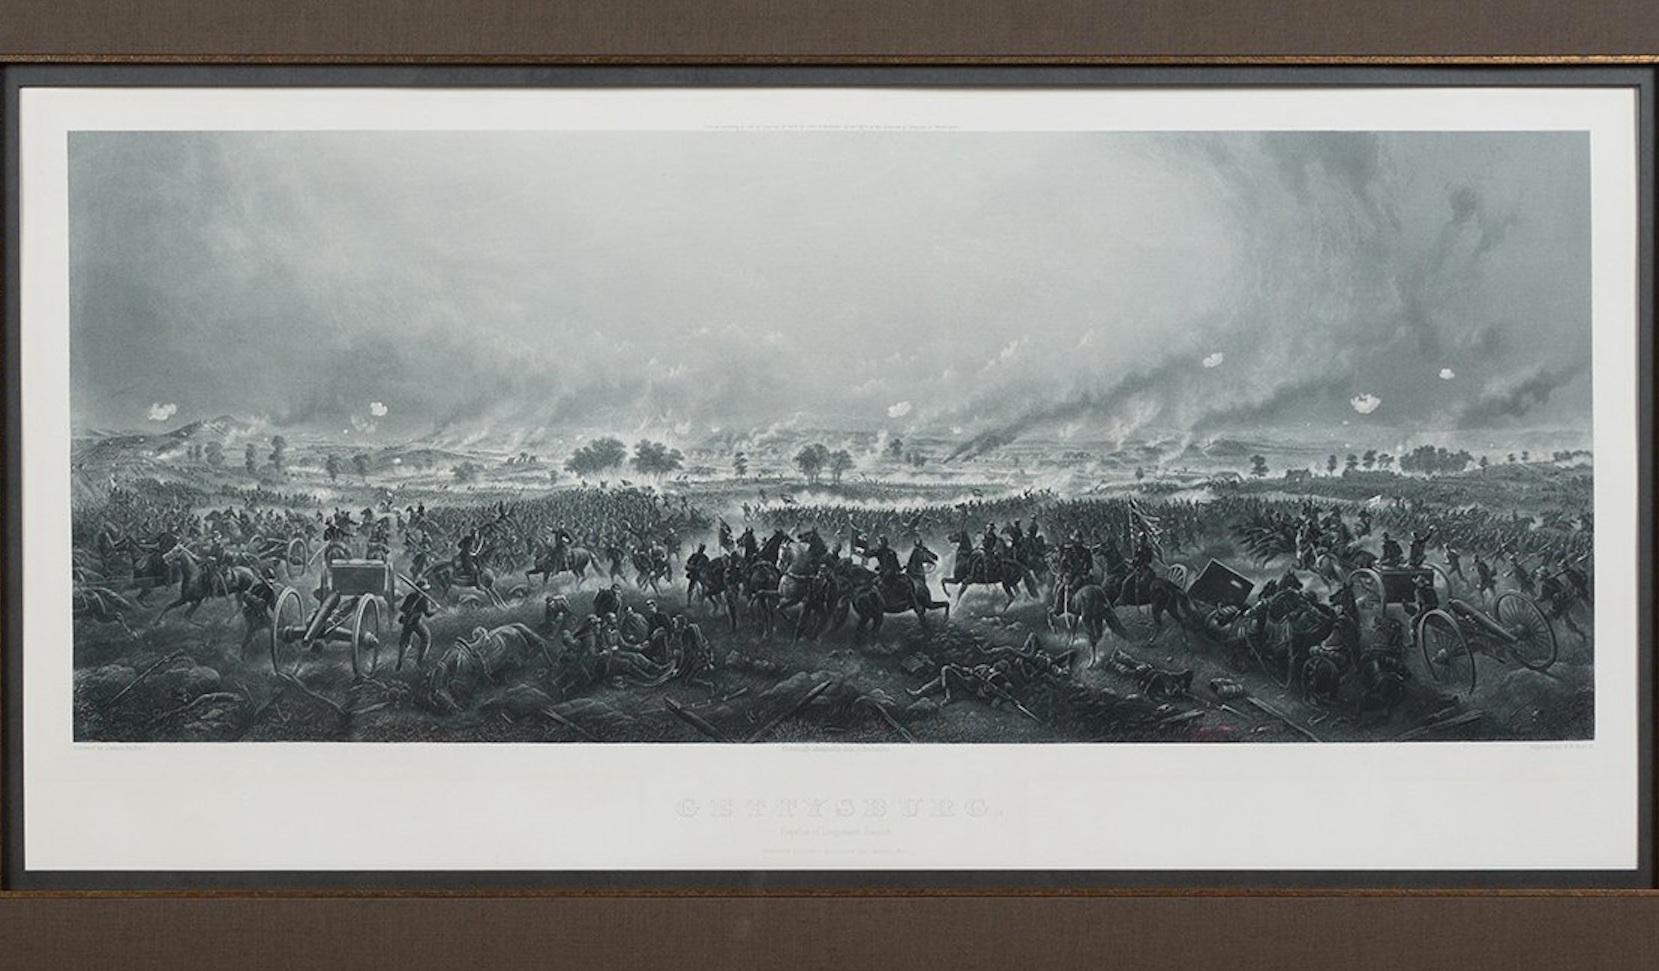 Presented here is an 1876 engraving of John B. Bachelder and James Walker’s Gettysburg. Repulse of Longstreet’s Assault together with two ornately decorated Union Officer swords. The engraved scene depicts the decisive battle on the final day of the